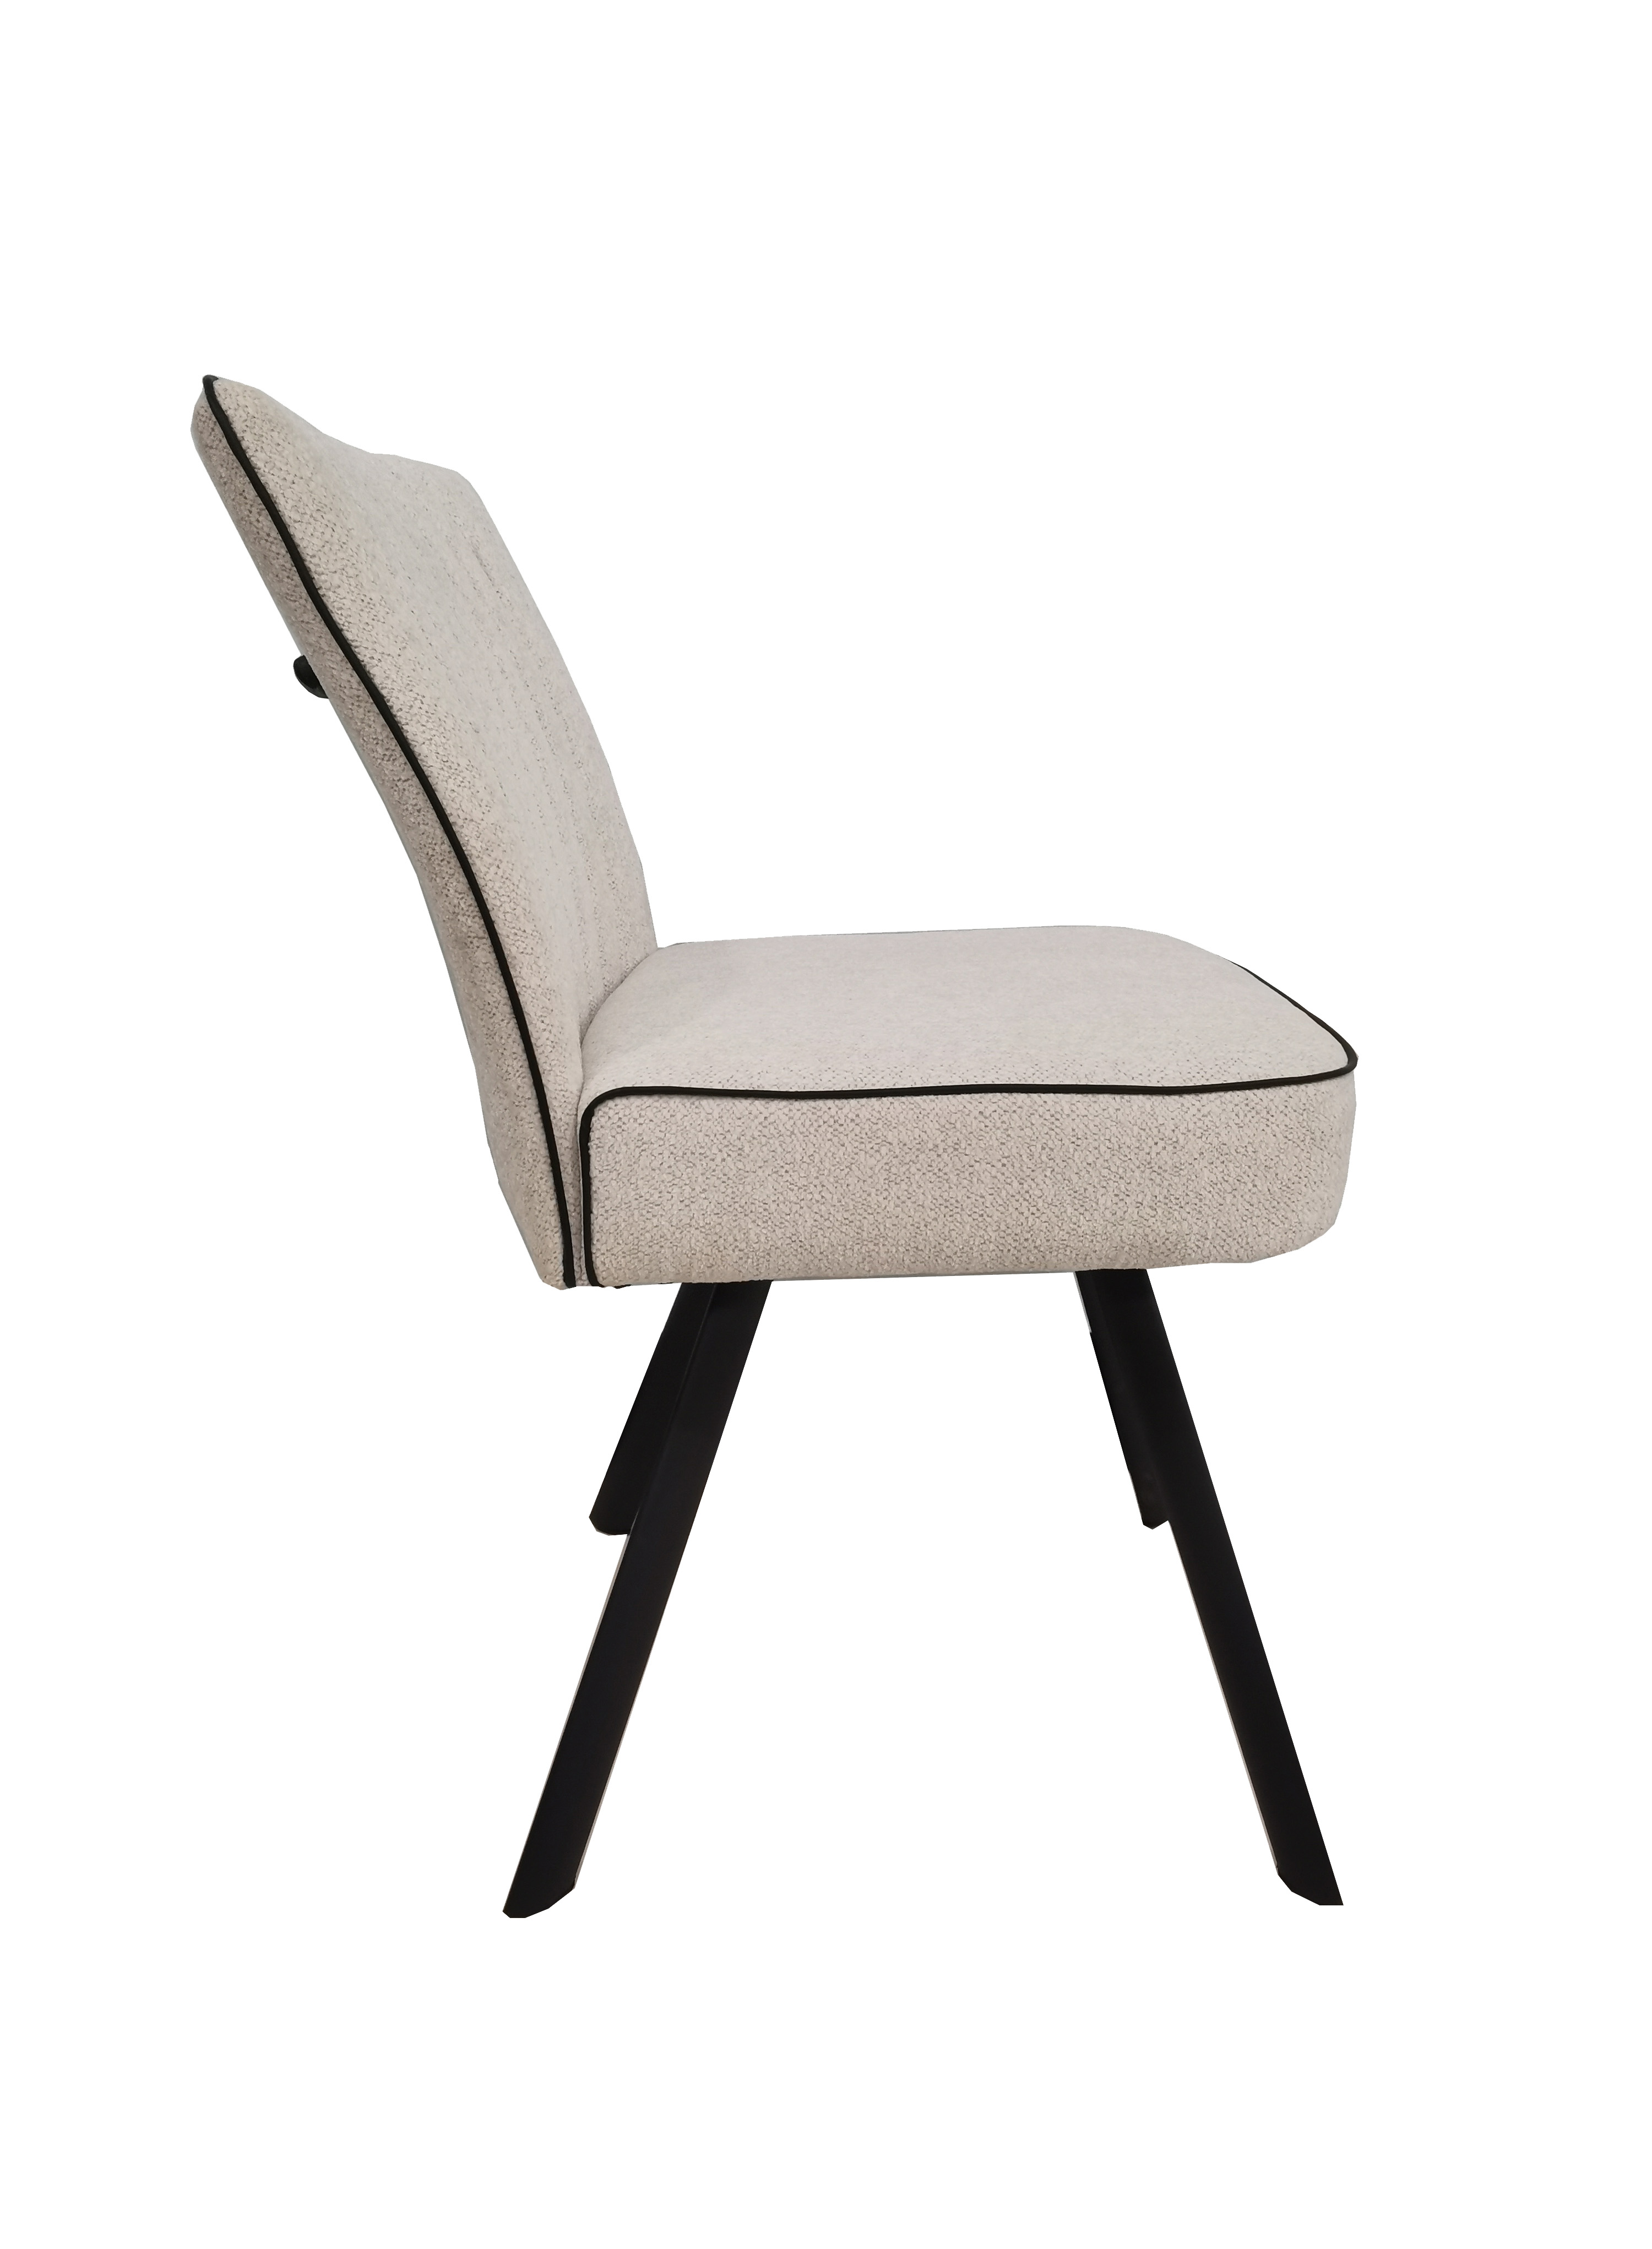 Modern Luxury DiningChairs Furniture Fabric Kitchen Chair with metal leg